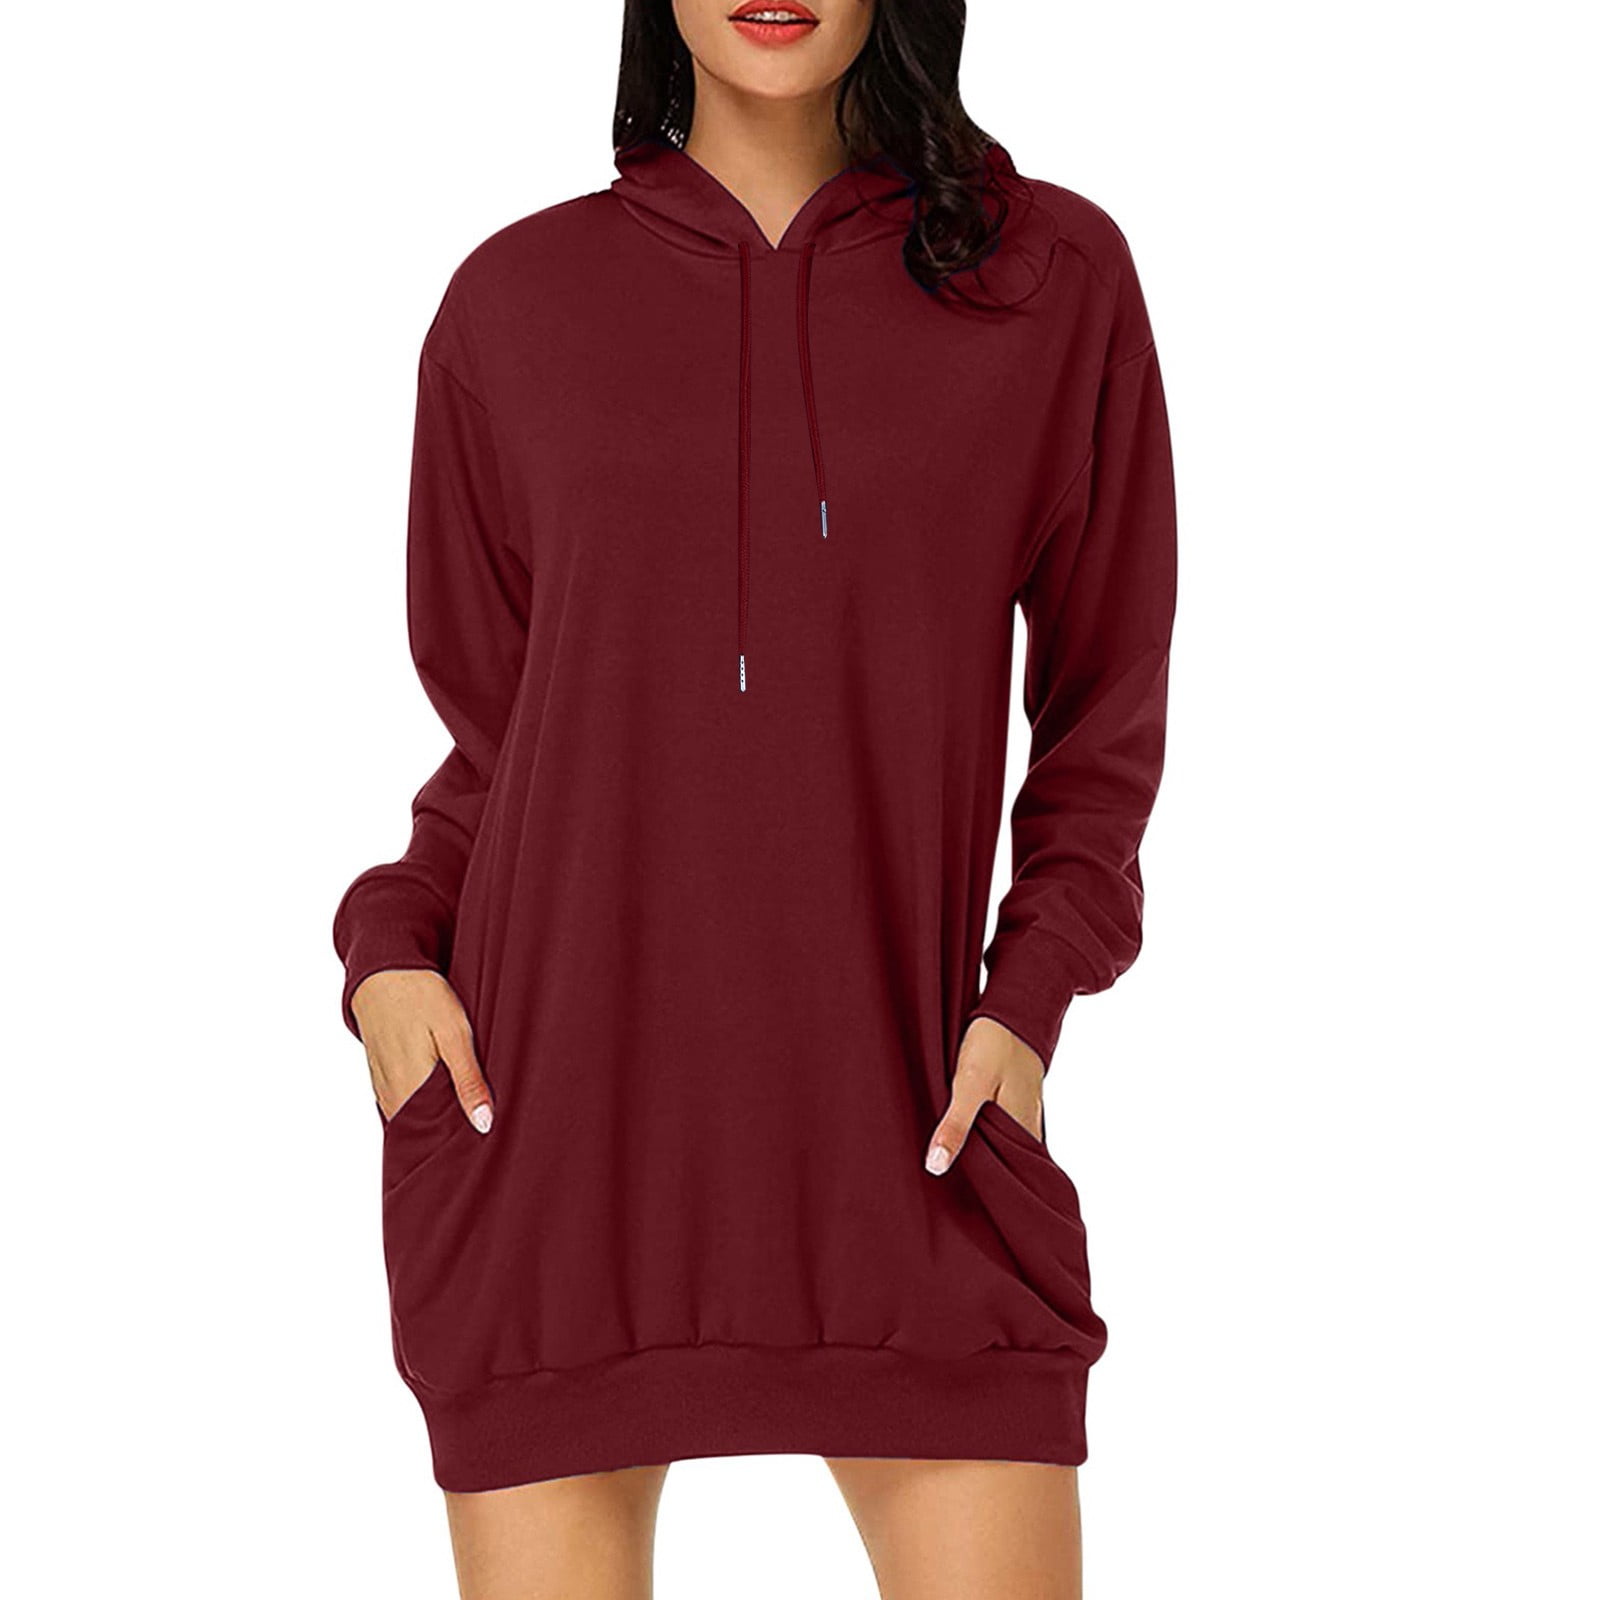 Clearance Fall Dresses Casual Women's Long-sleeved Pocket Pullover ...